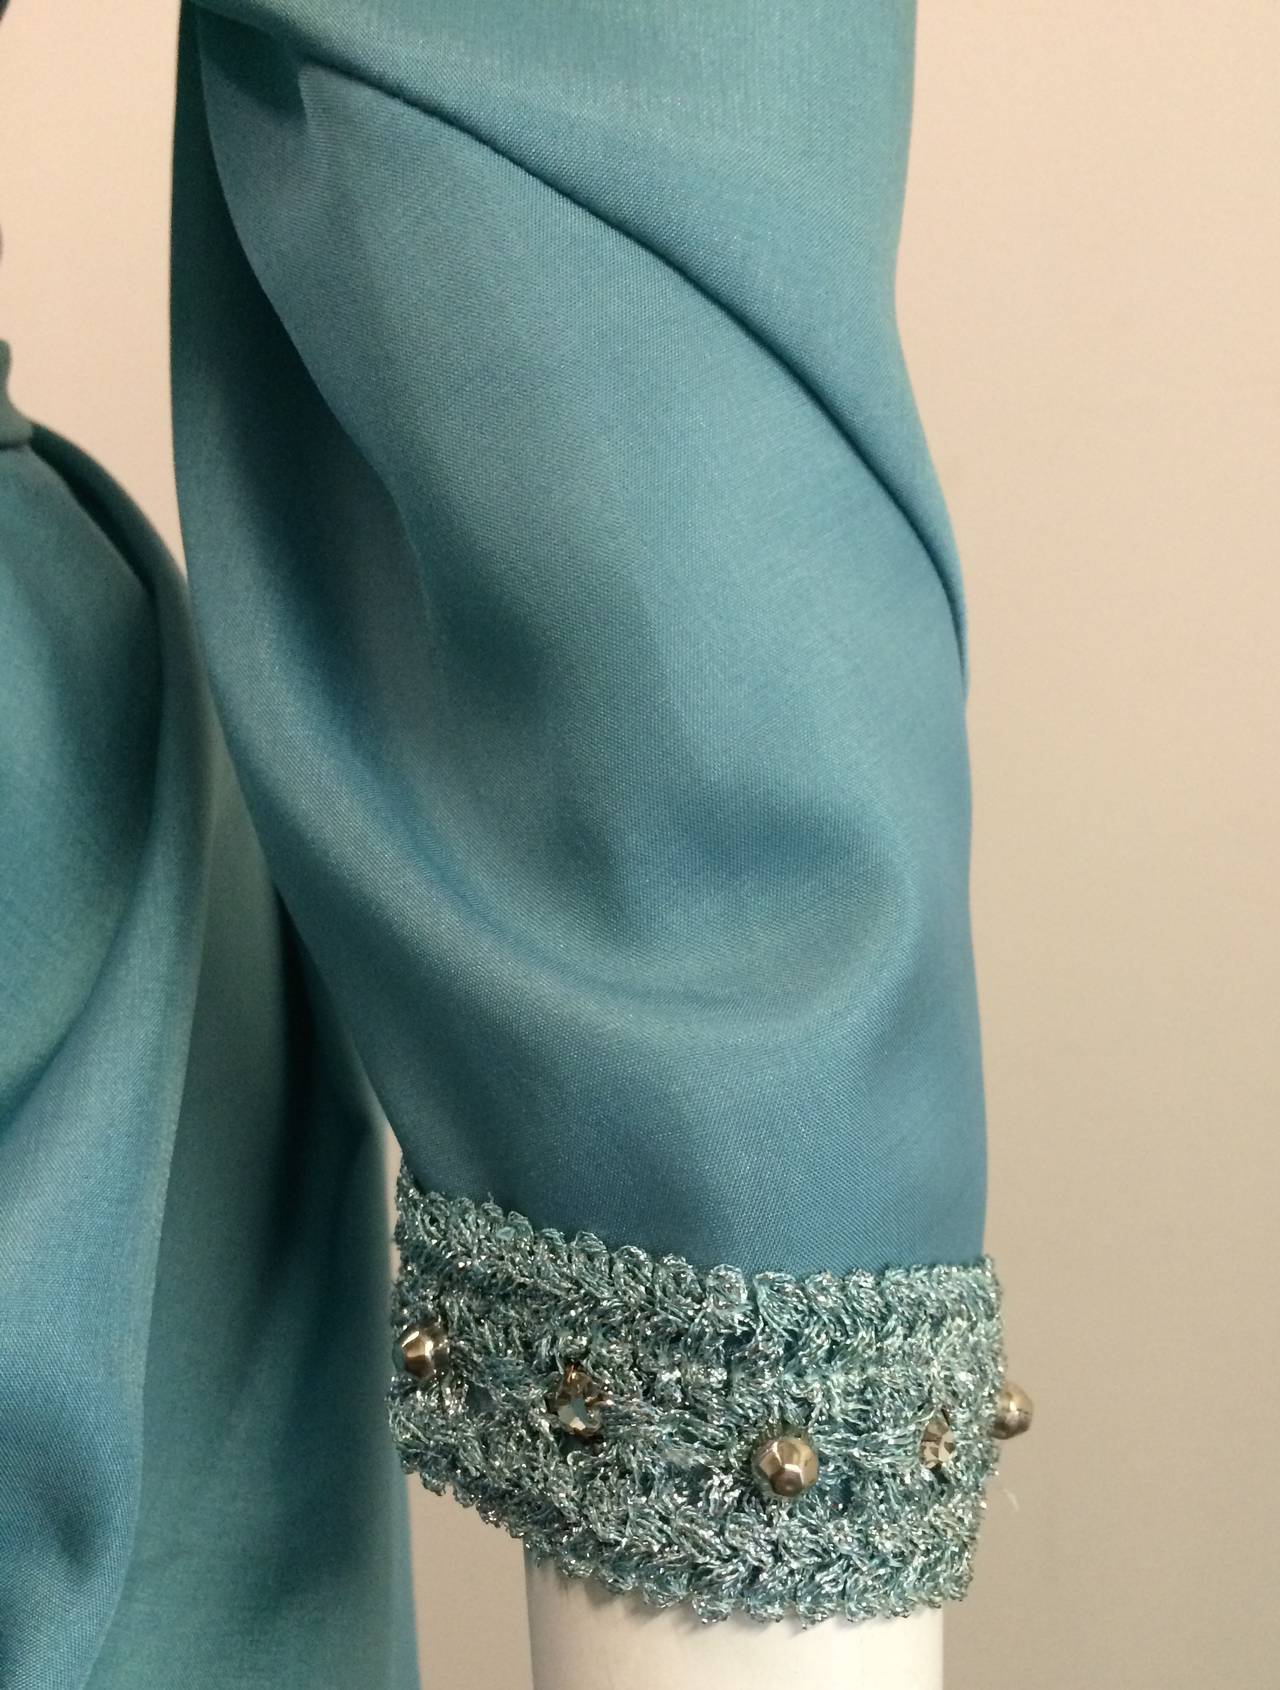 Women's Halston 70s caftan / gown with beading trim and sash.